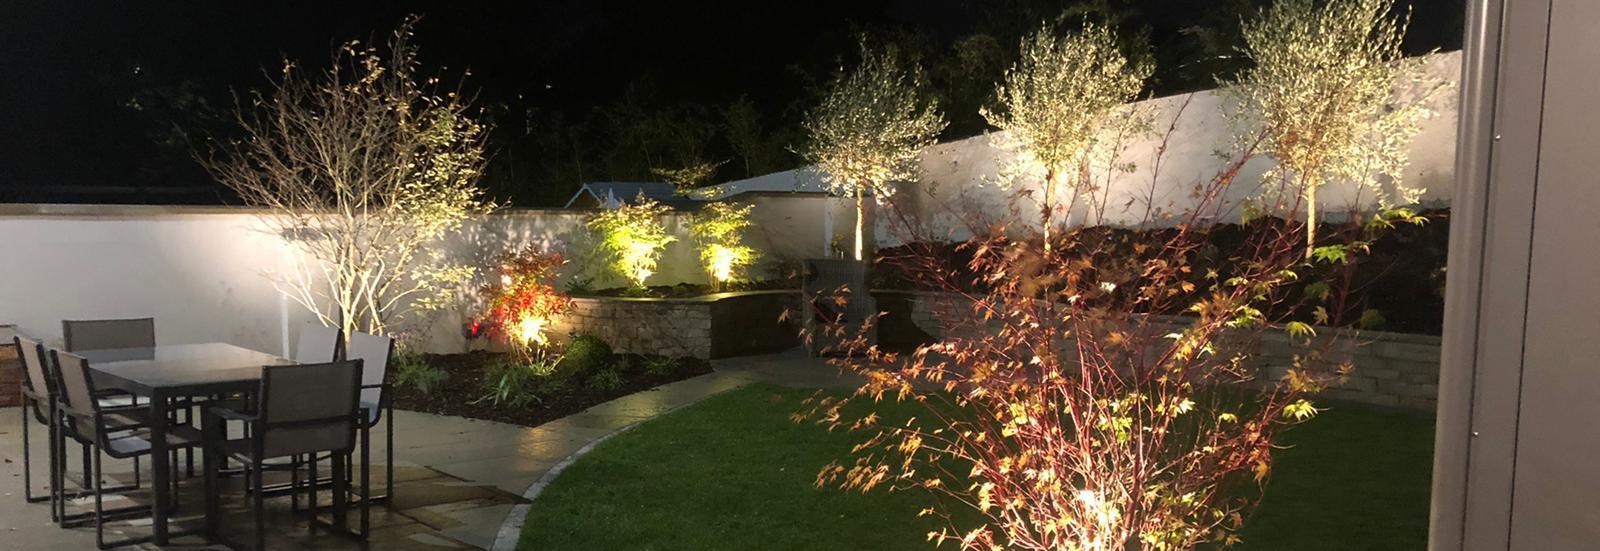 Professional Garden LED Lighting services | supplied + fitted in Dublin